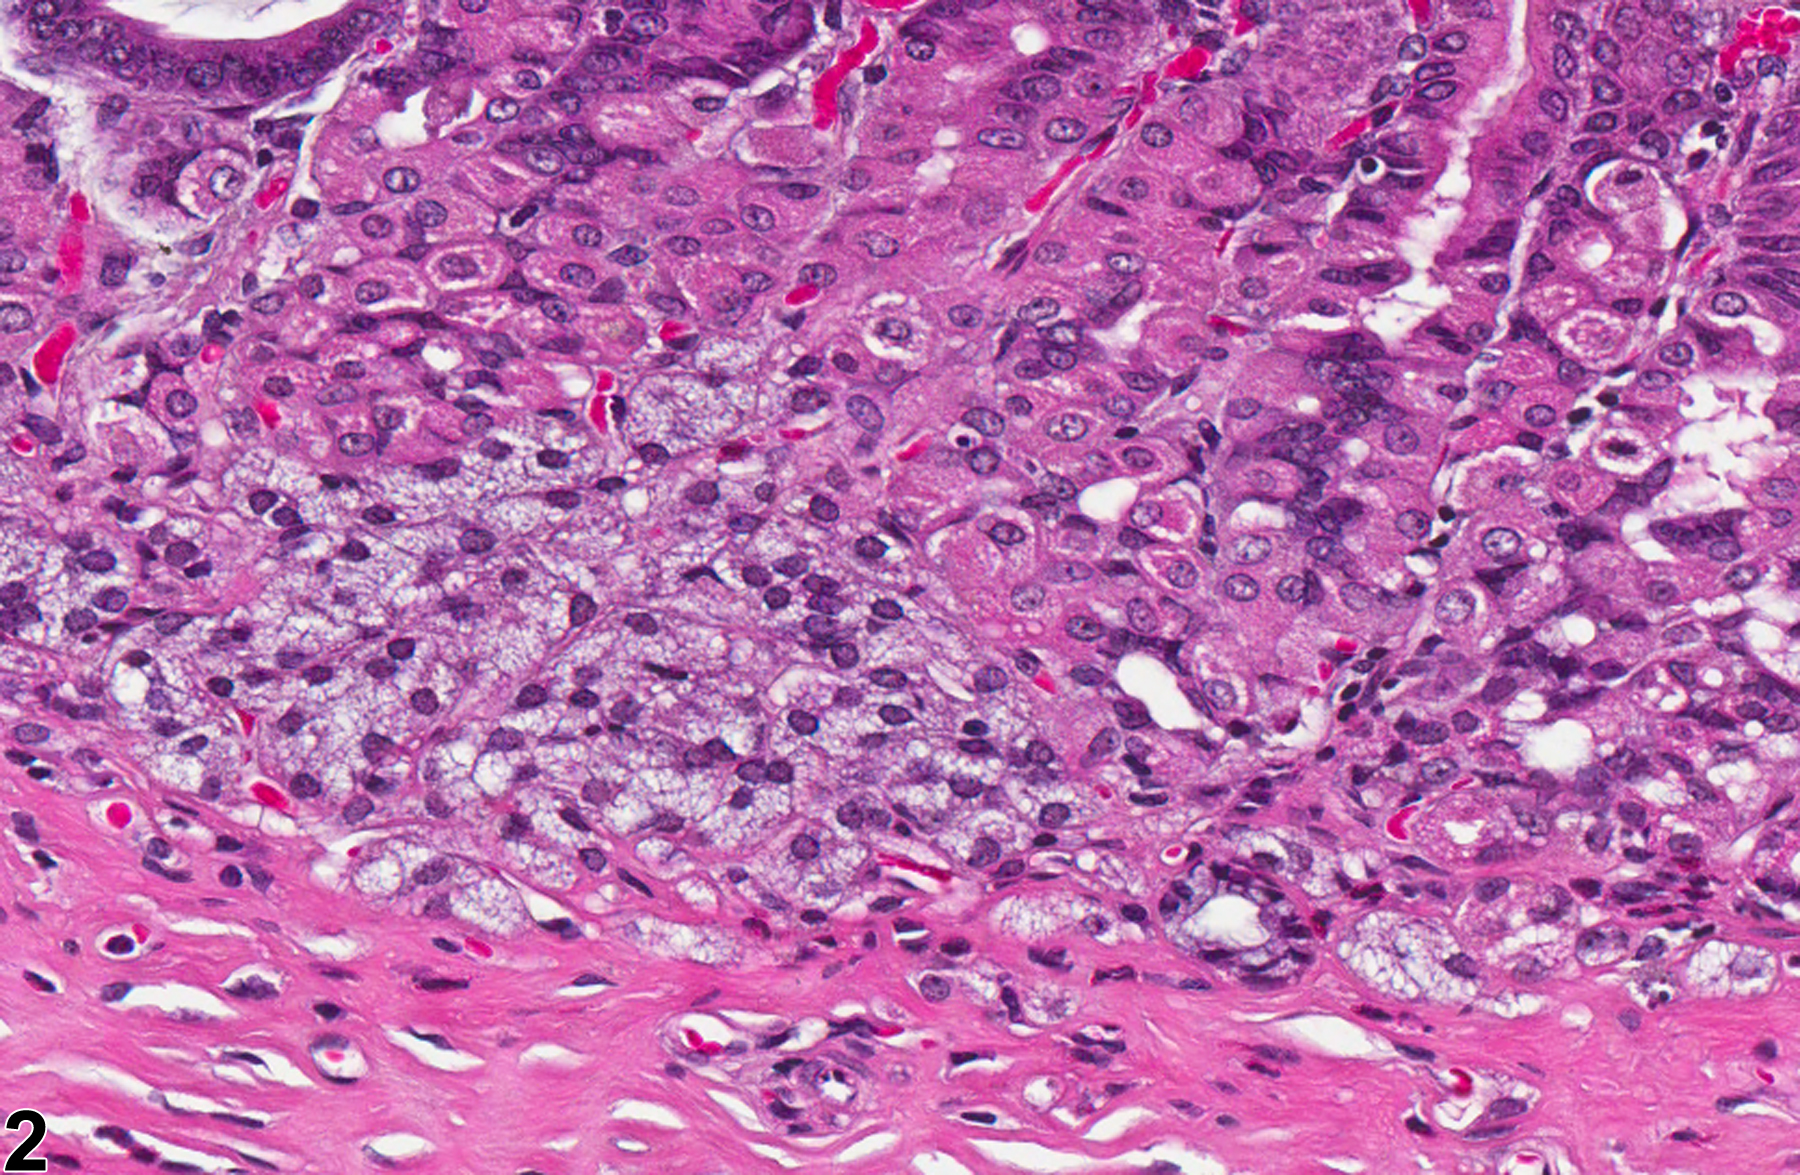 Image of hyperplasia in the glandular stomach epithelium from a female F344/N rat in a chronic study